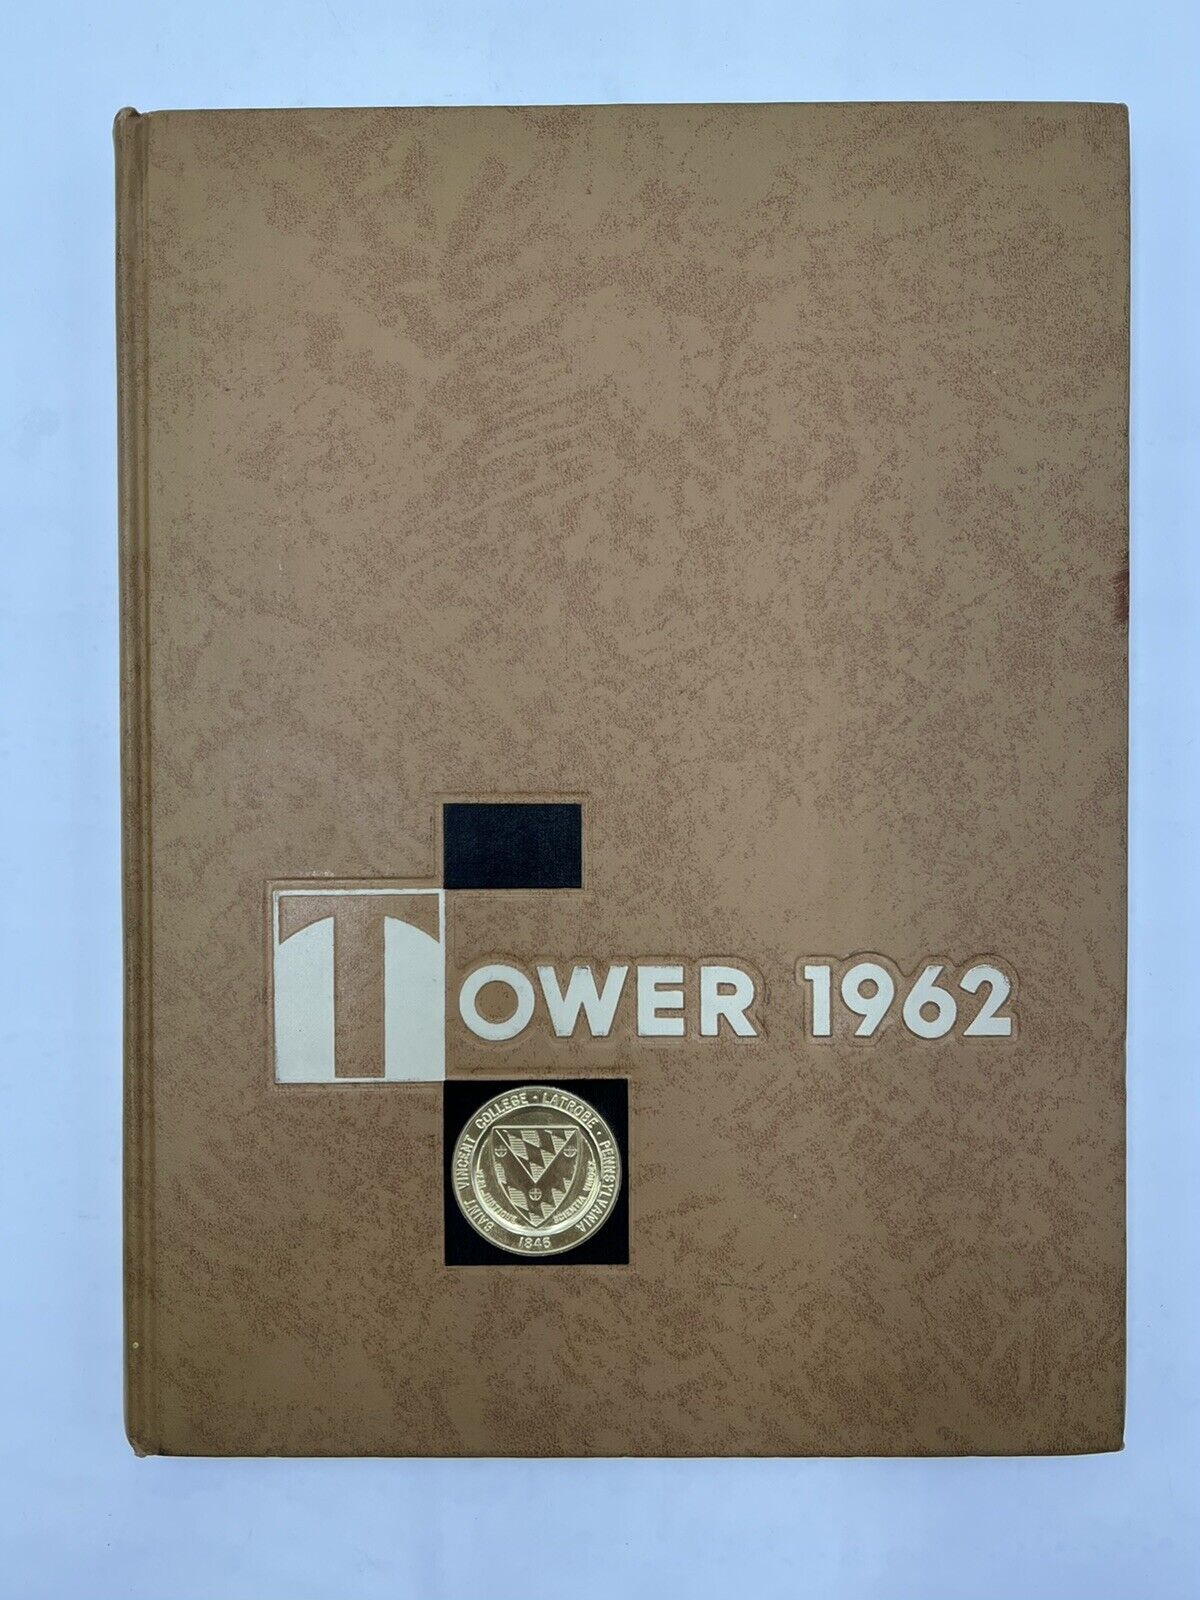 1962 The Tower Saint Vincent College Latrobe Pennsylvania PA Hardcover Yearbook